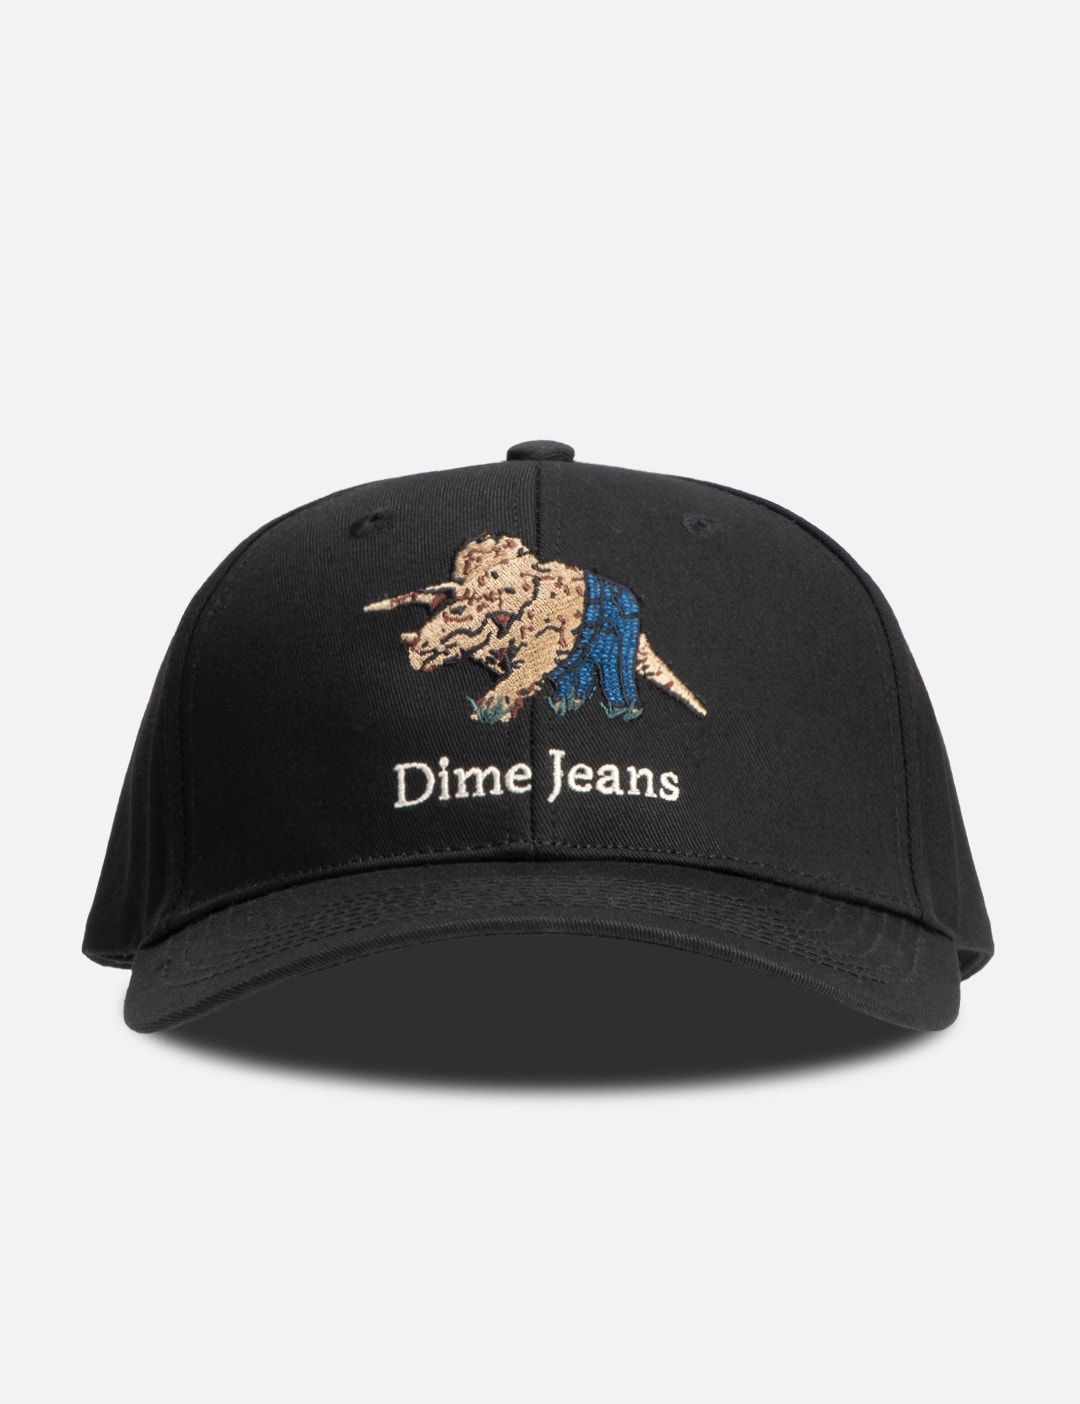 Dime - JEANS DINO CAP HBX - Globally Curated Fashion and by Hypebeast